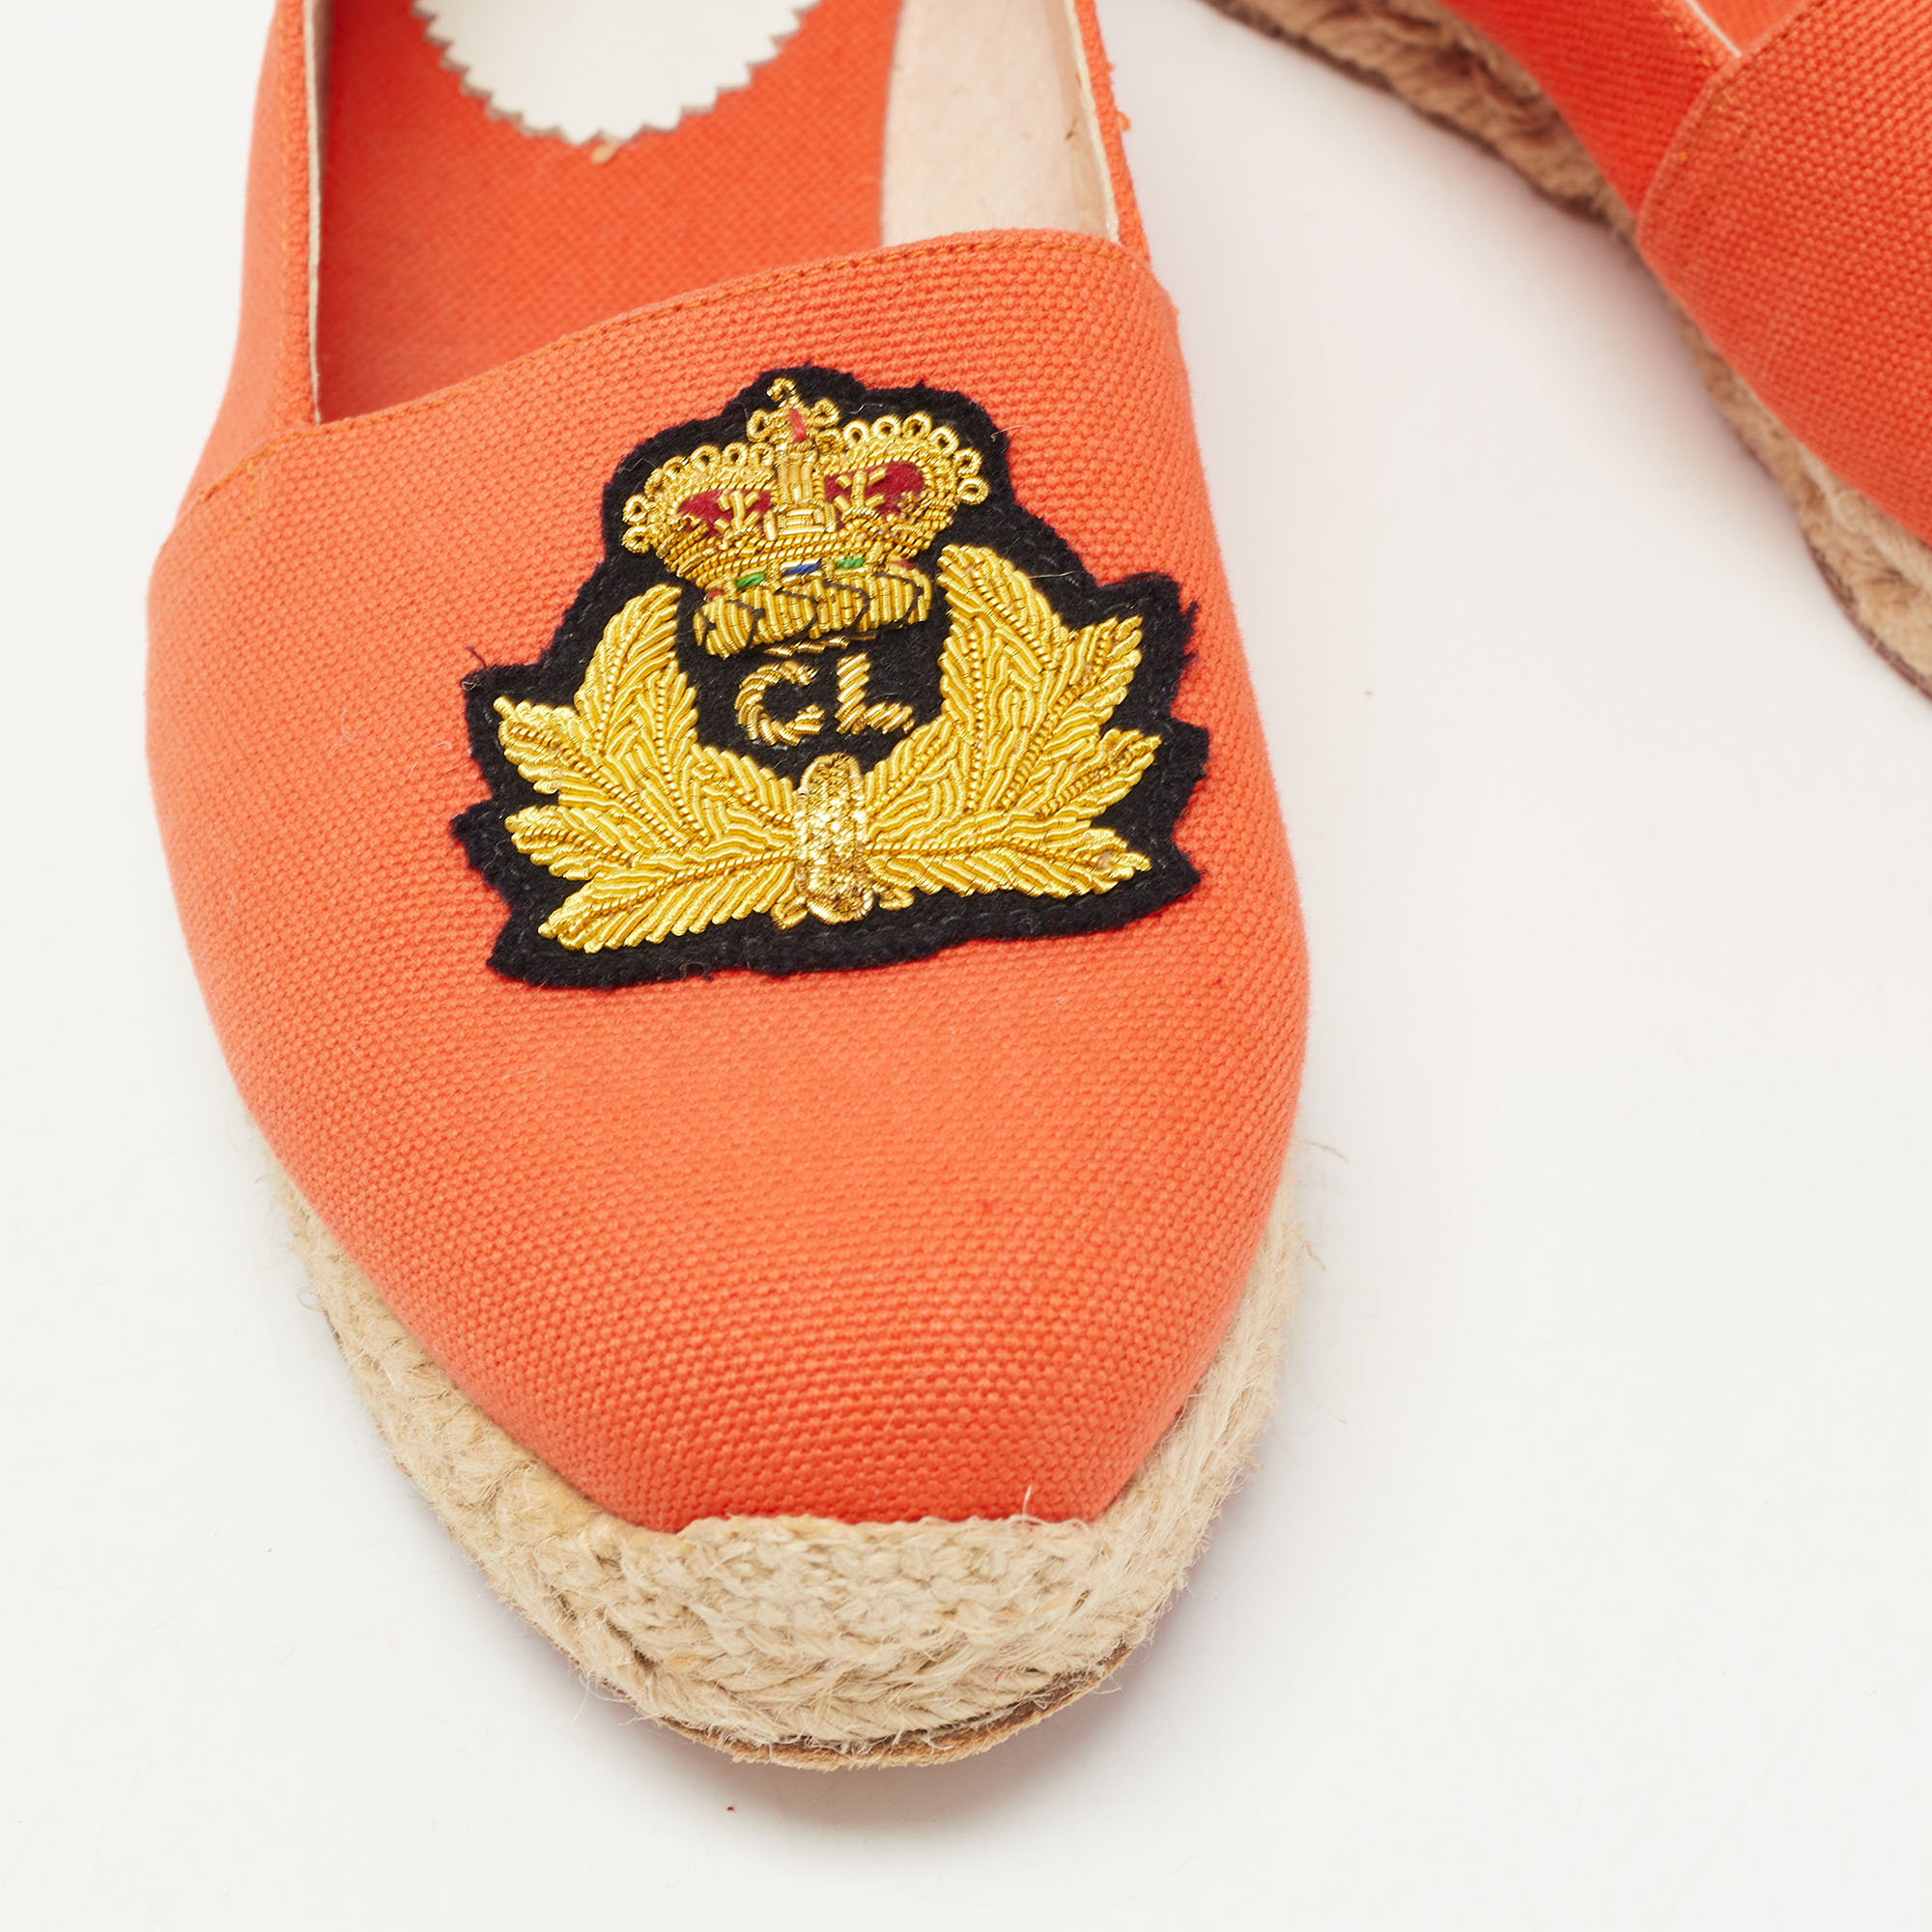 Christian Louboutin Orange Canvas Gala Embroidered Crest Espadrille Loafers Size 38